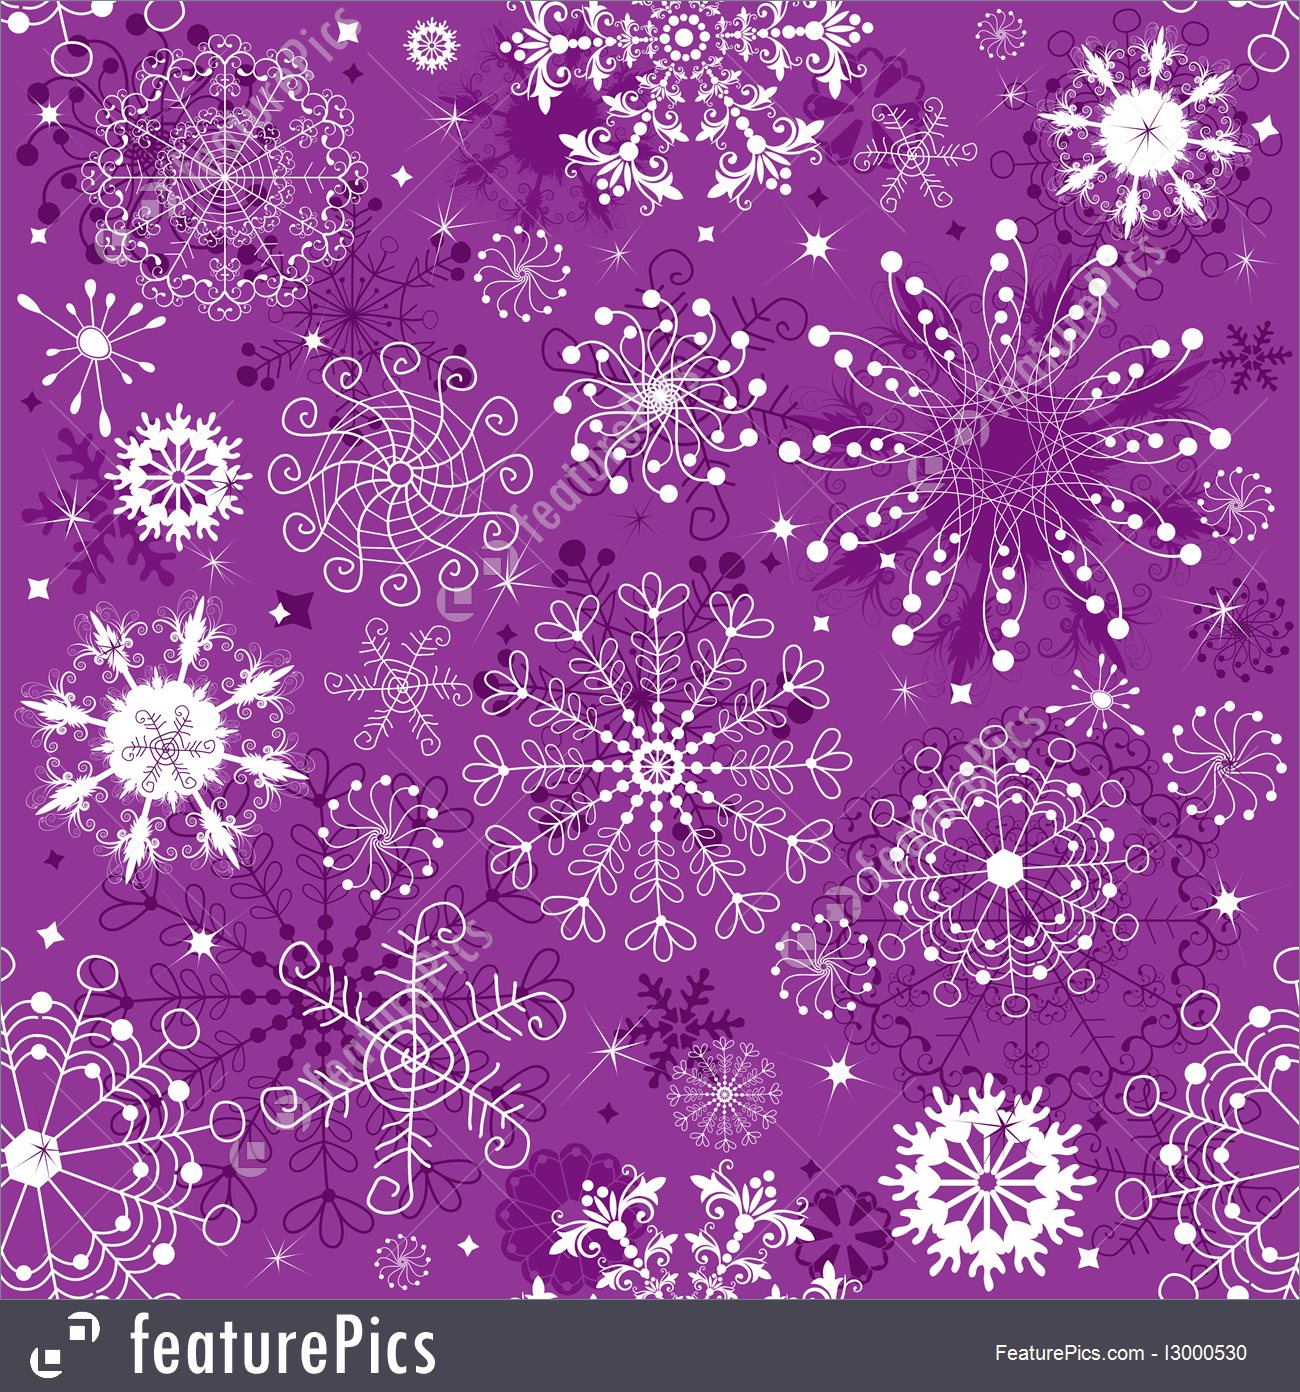 Repeating Violet And White Christmas Wallpaper - Christmas Wallpaper Purple - HD Wallpaper 